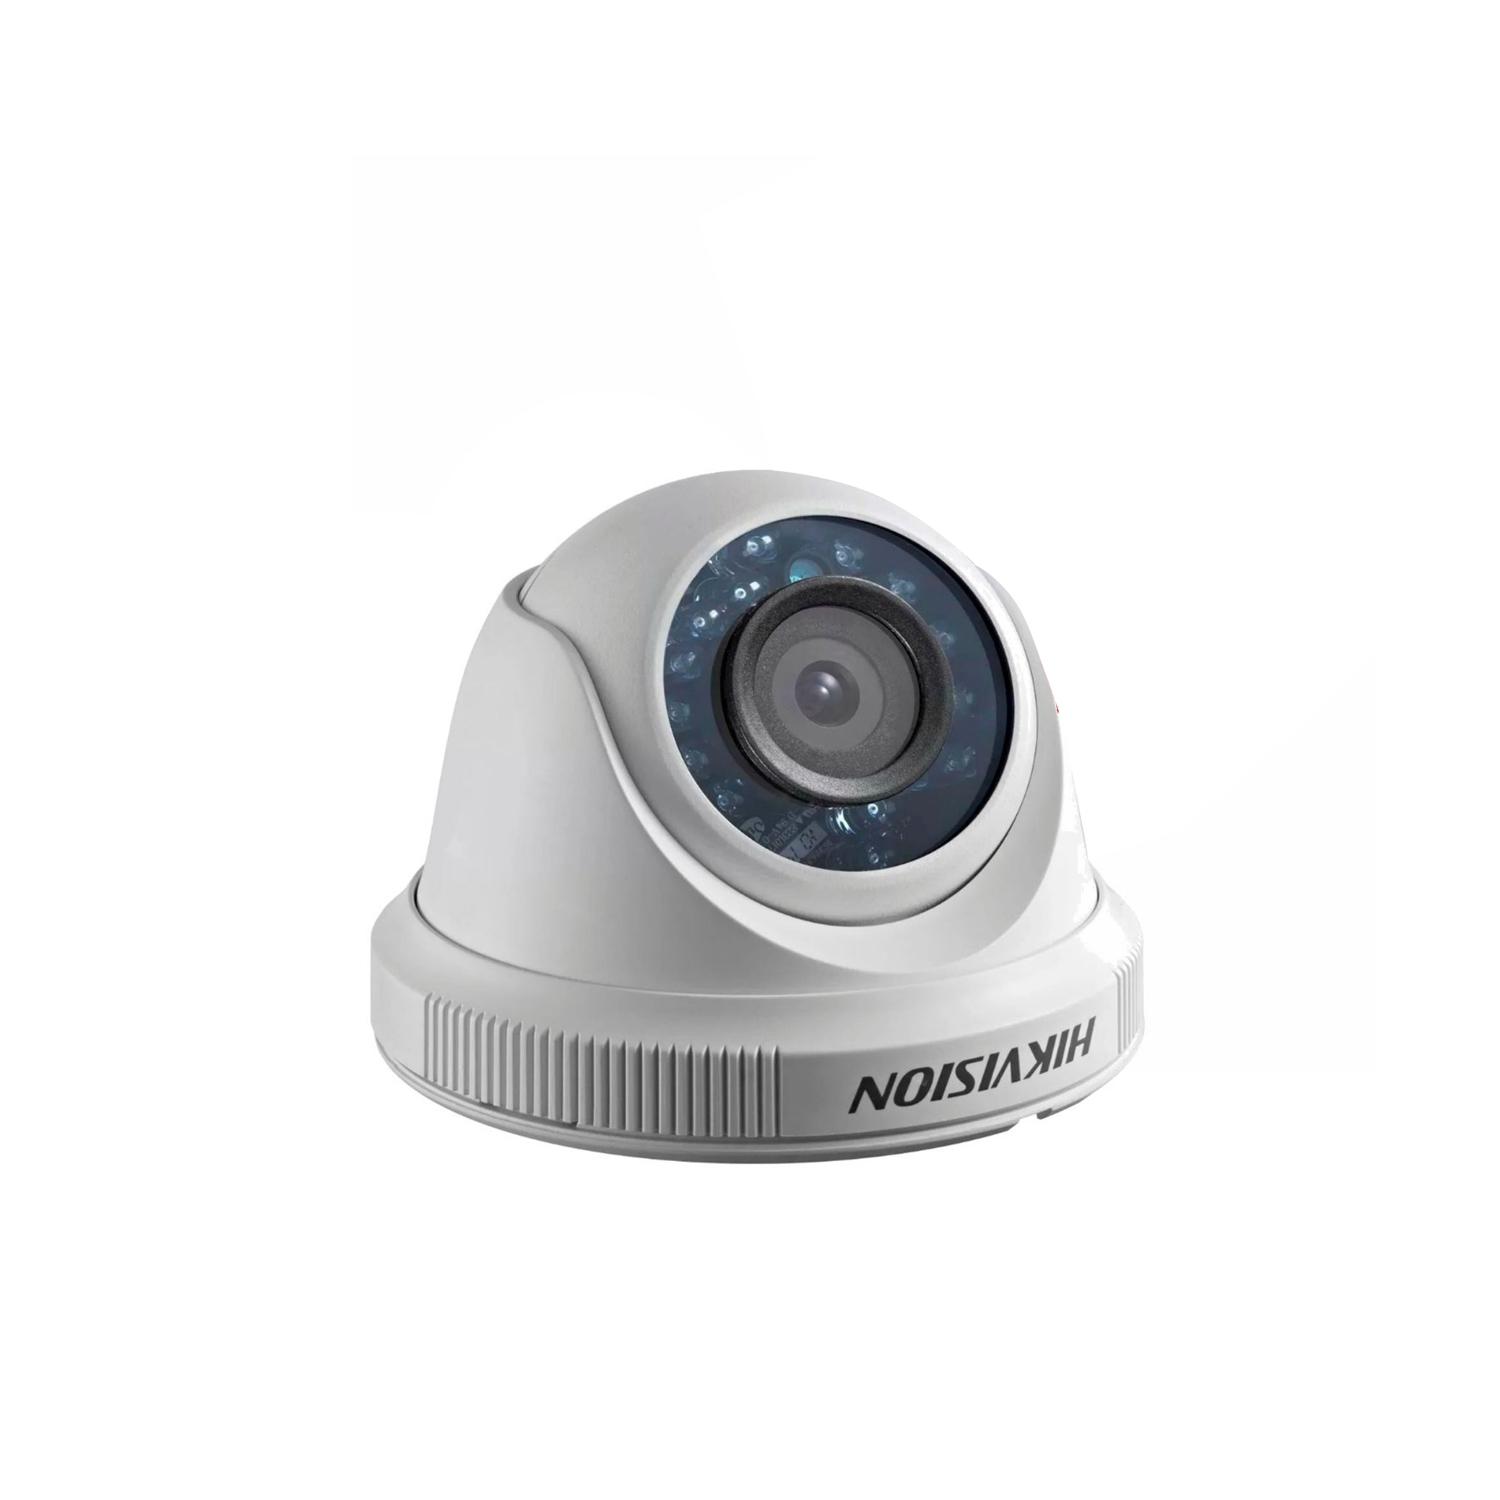 AHD KAMERA DOME 2MP 2.8MM HIKVISION DS-2CE56D0T-IRPF